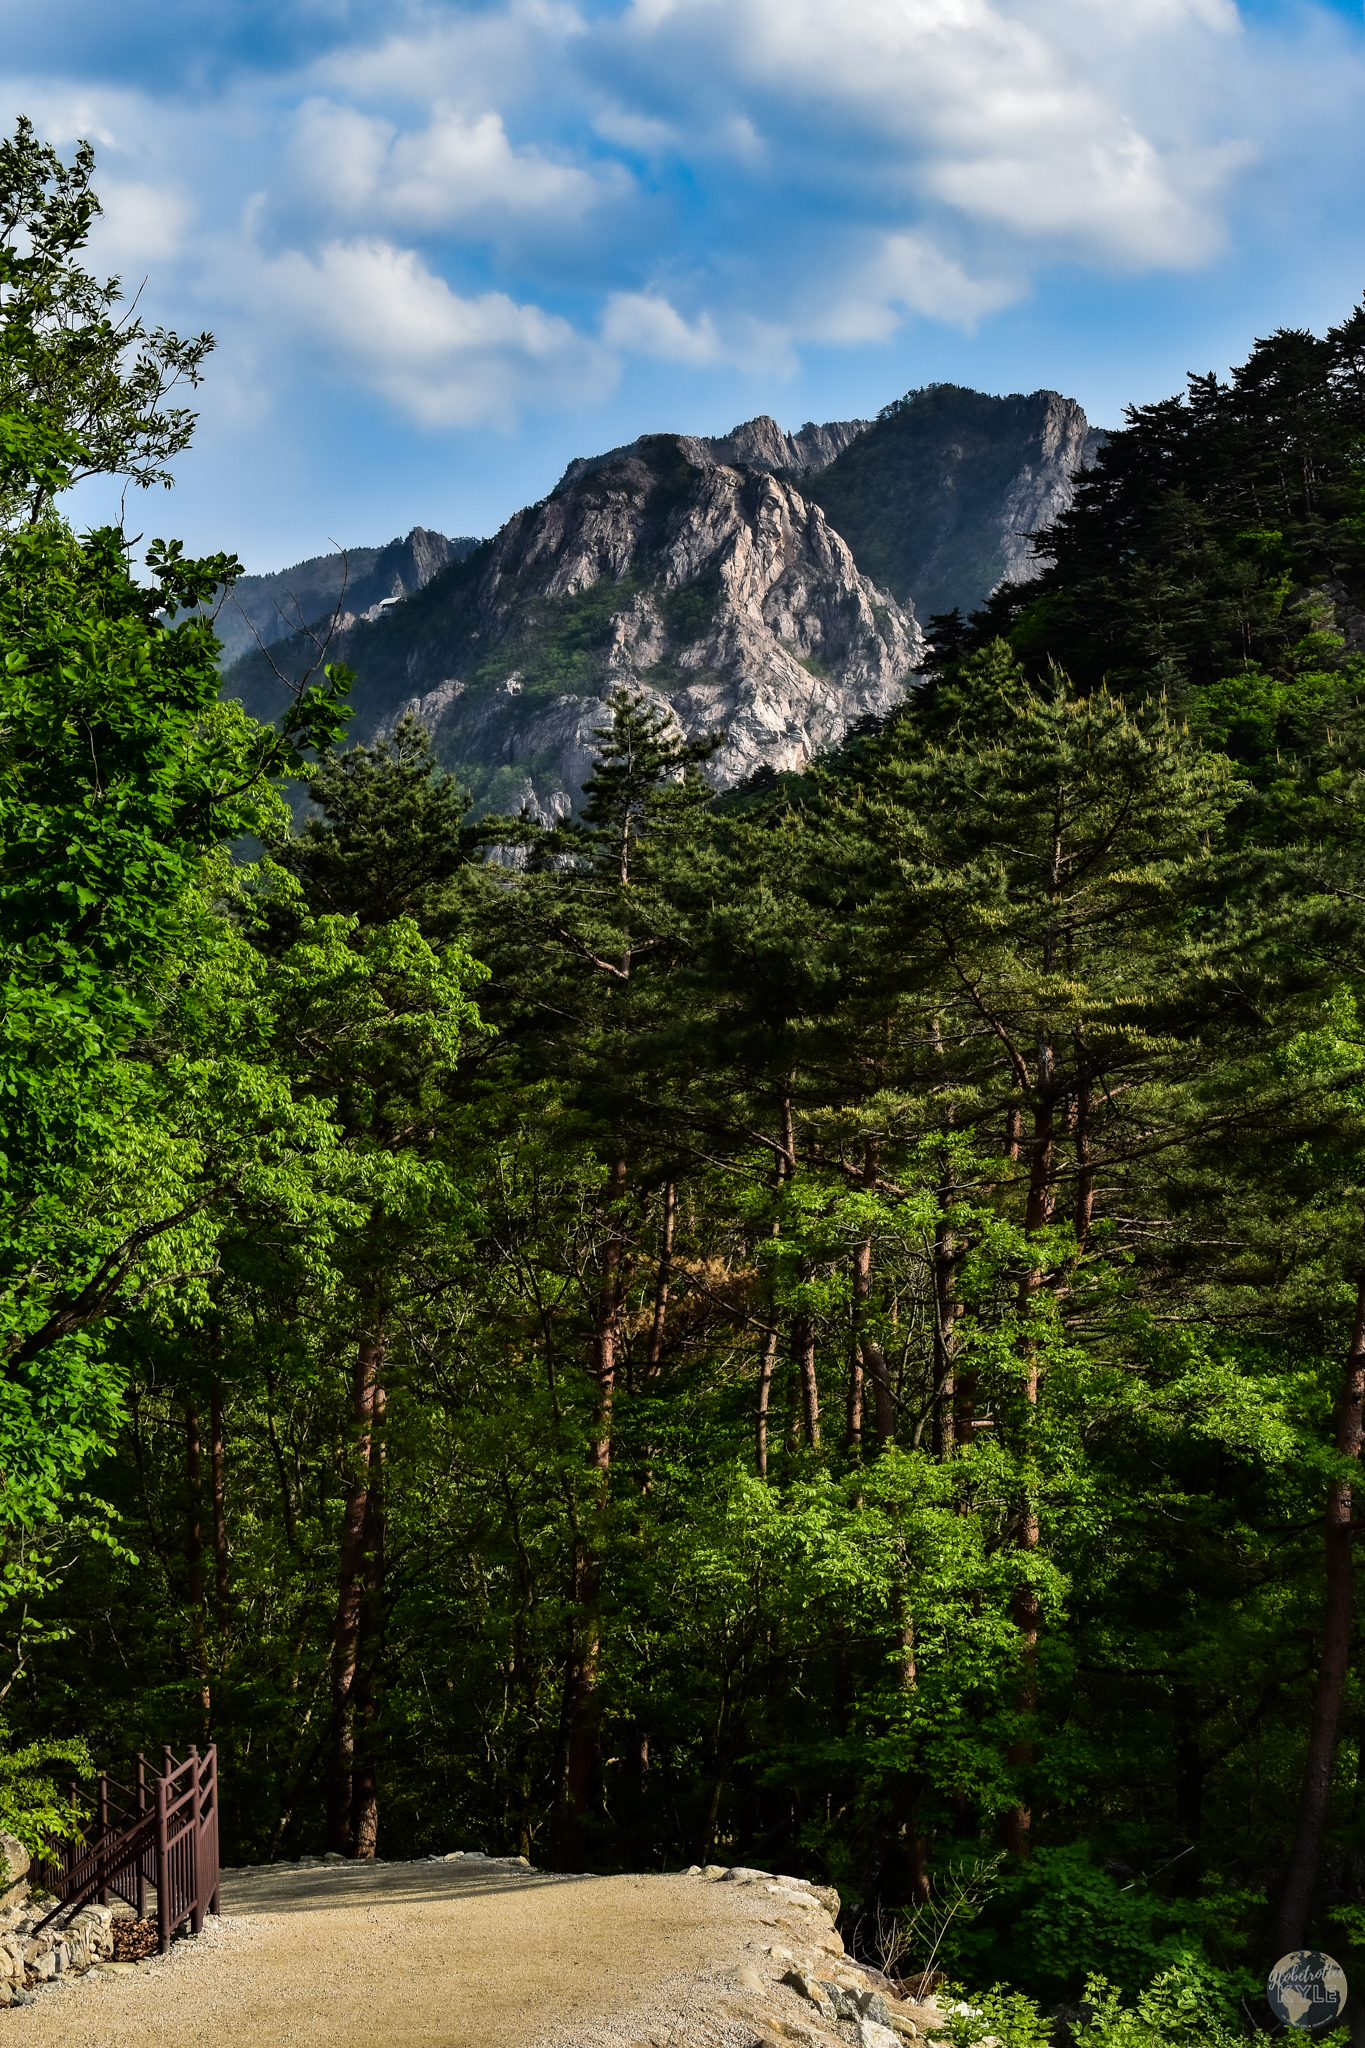 A path leading into a dense pine forest with a mountain rising in the background beneath a partly cloudy sky at Soraksan National Park, South Korea